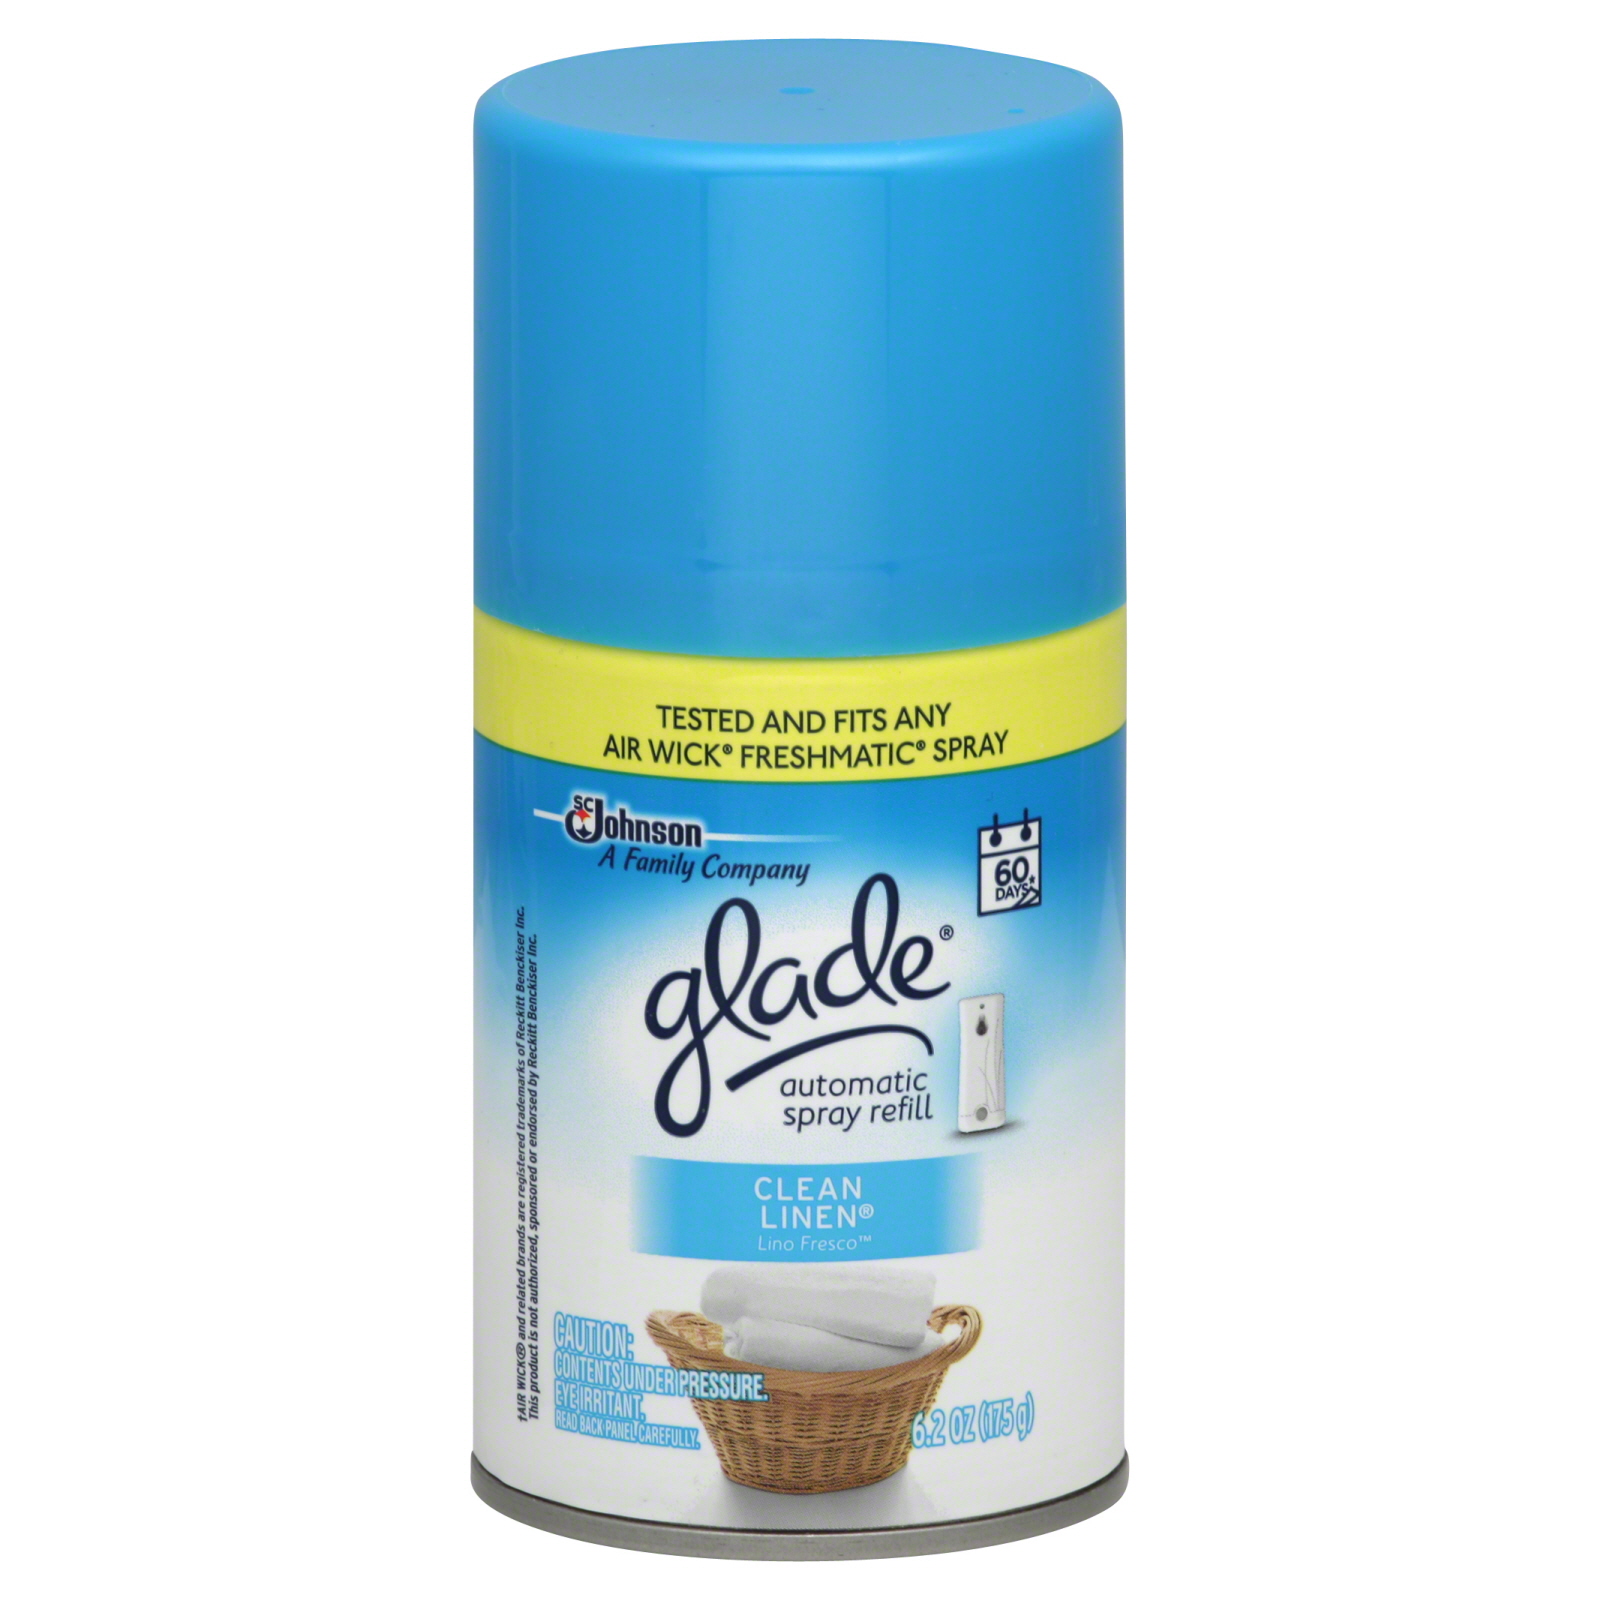 Glade Automatic Spray Refill, Clean Linen, 6.2 oz (175 g)